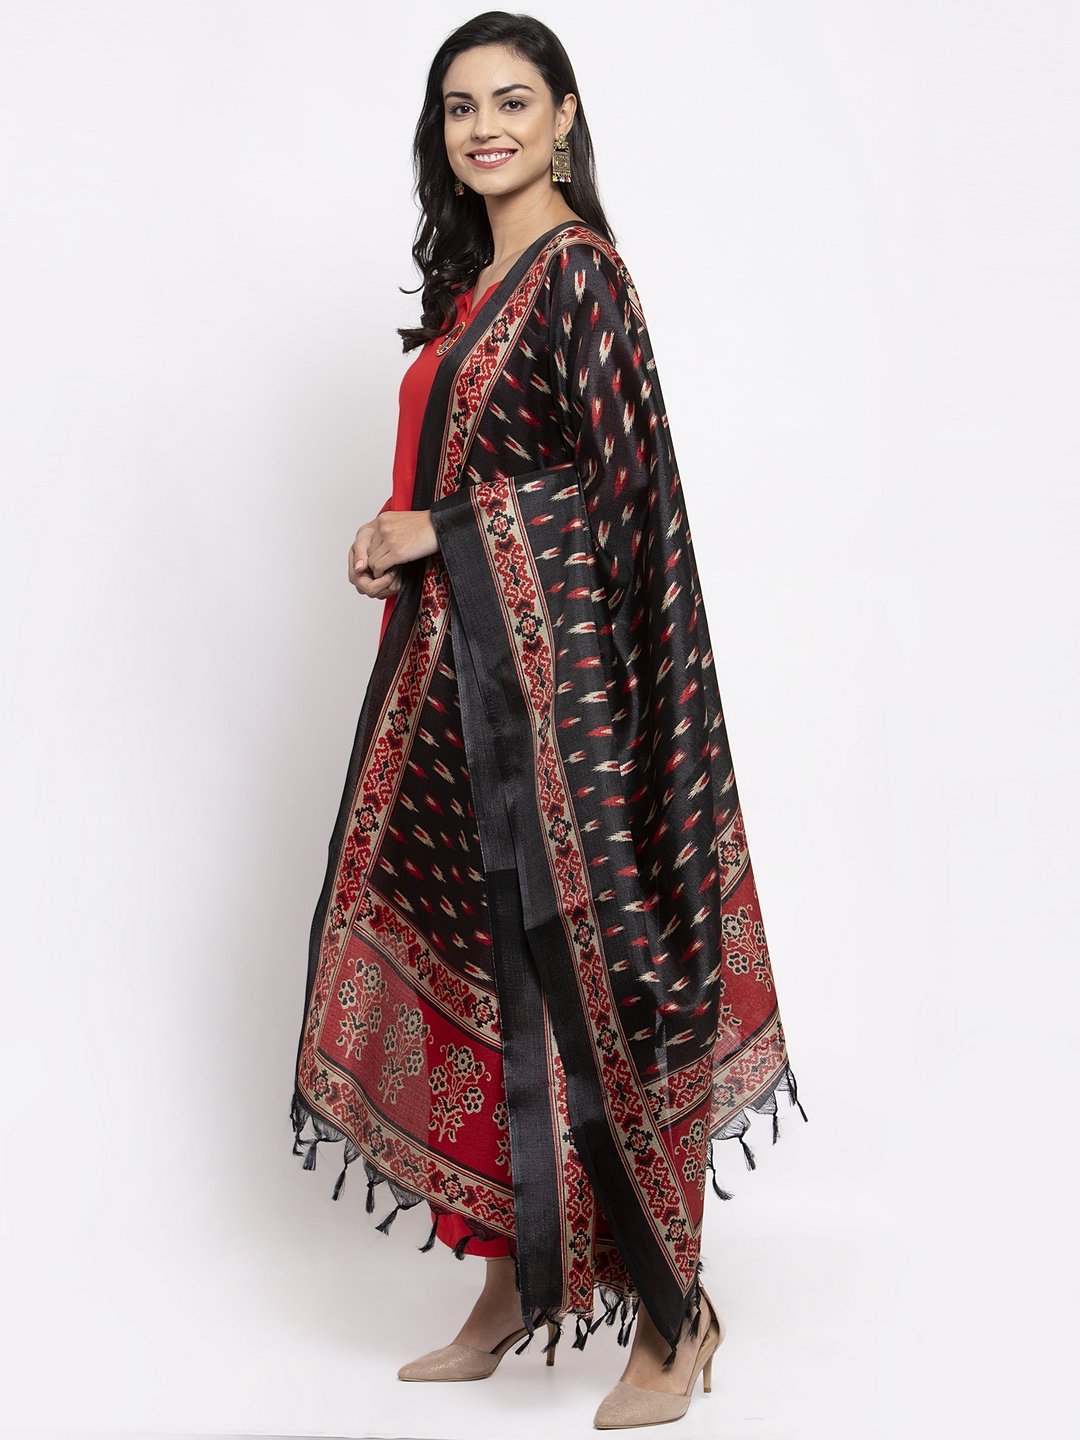 Women's Red Solid Kurta with Palazzos & Red Black Printed Dupatta - Jompers